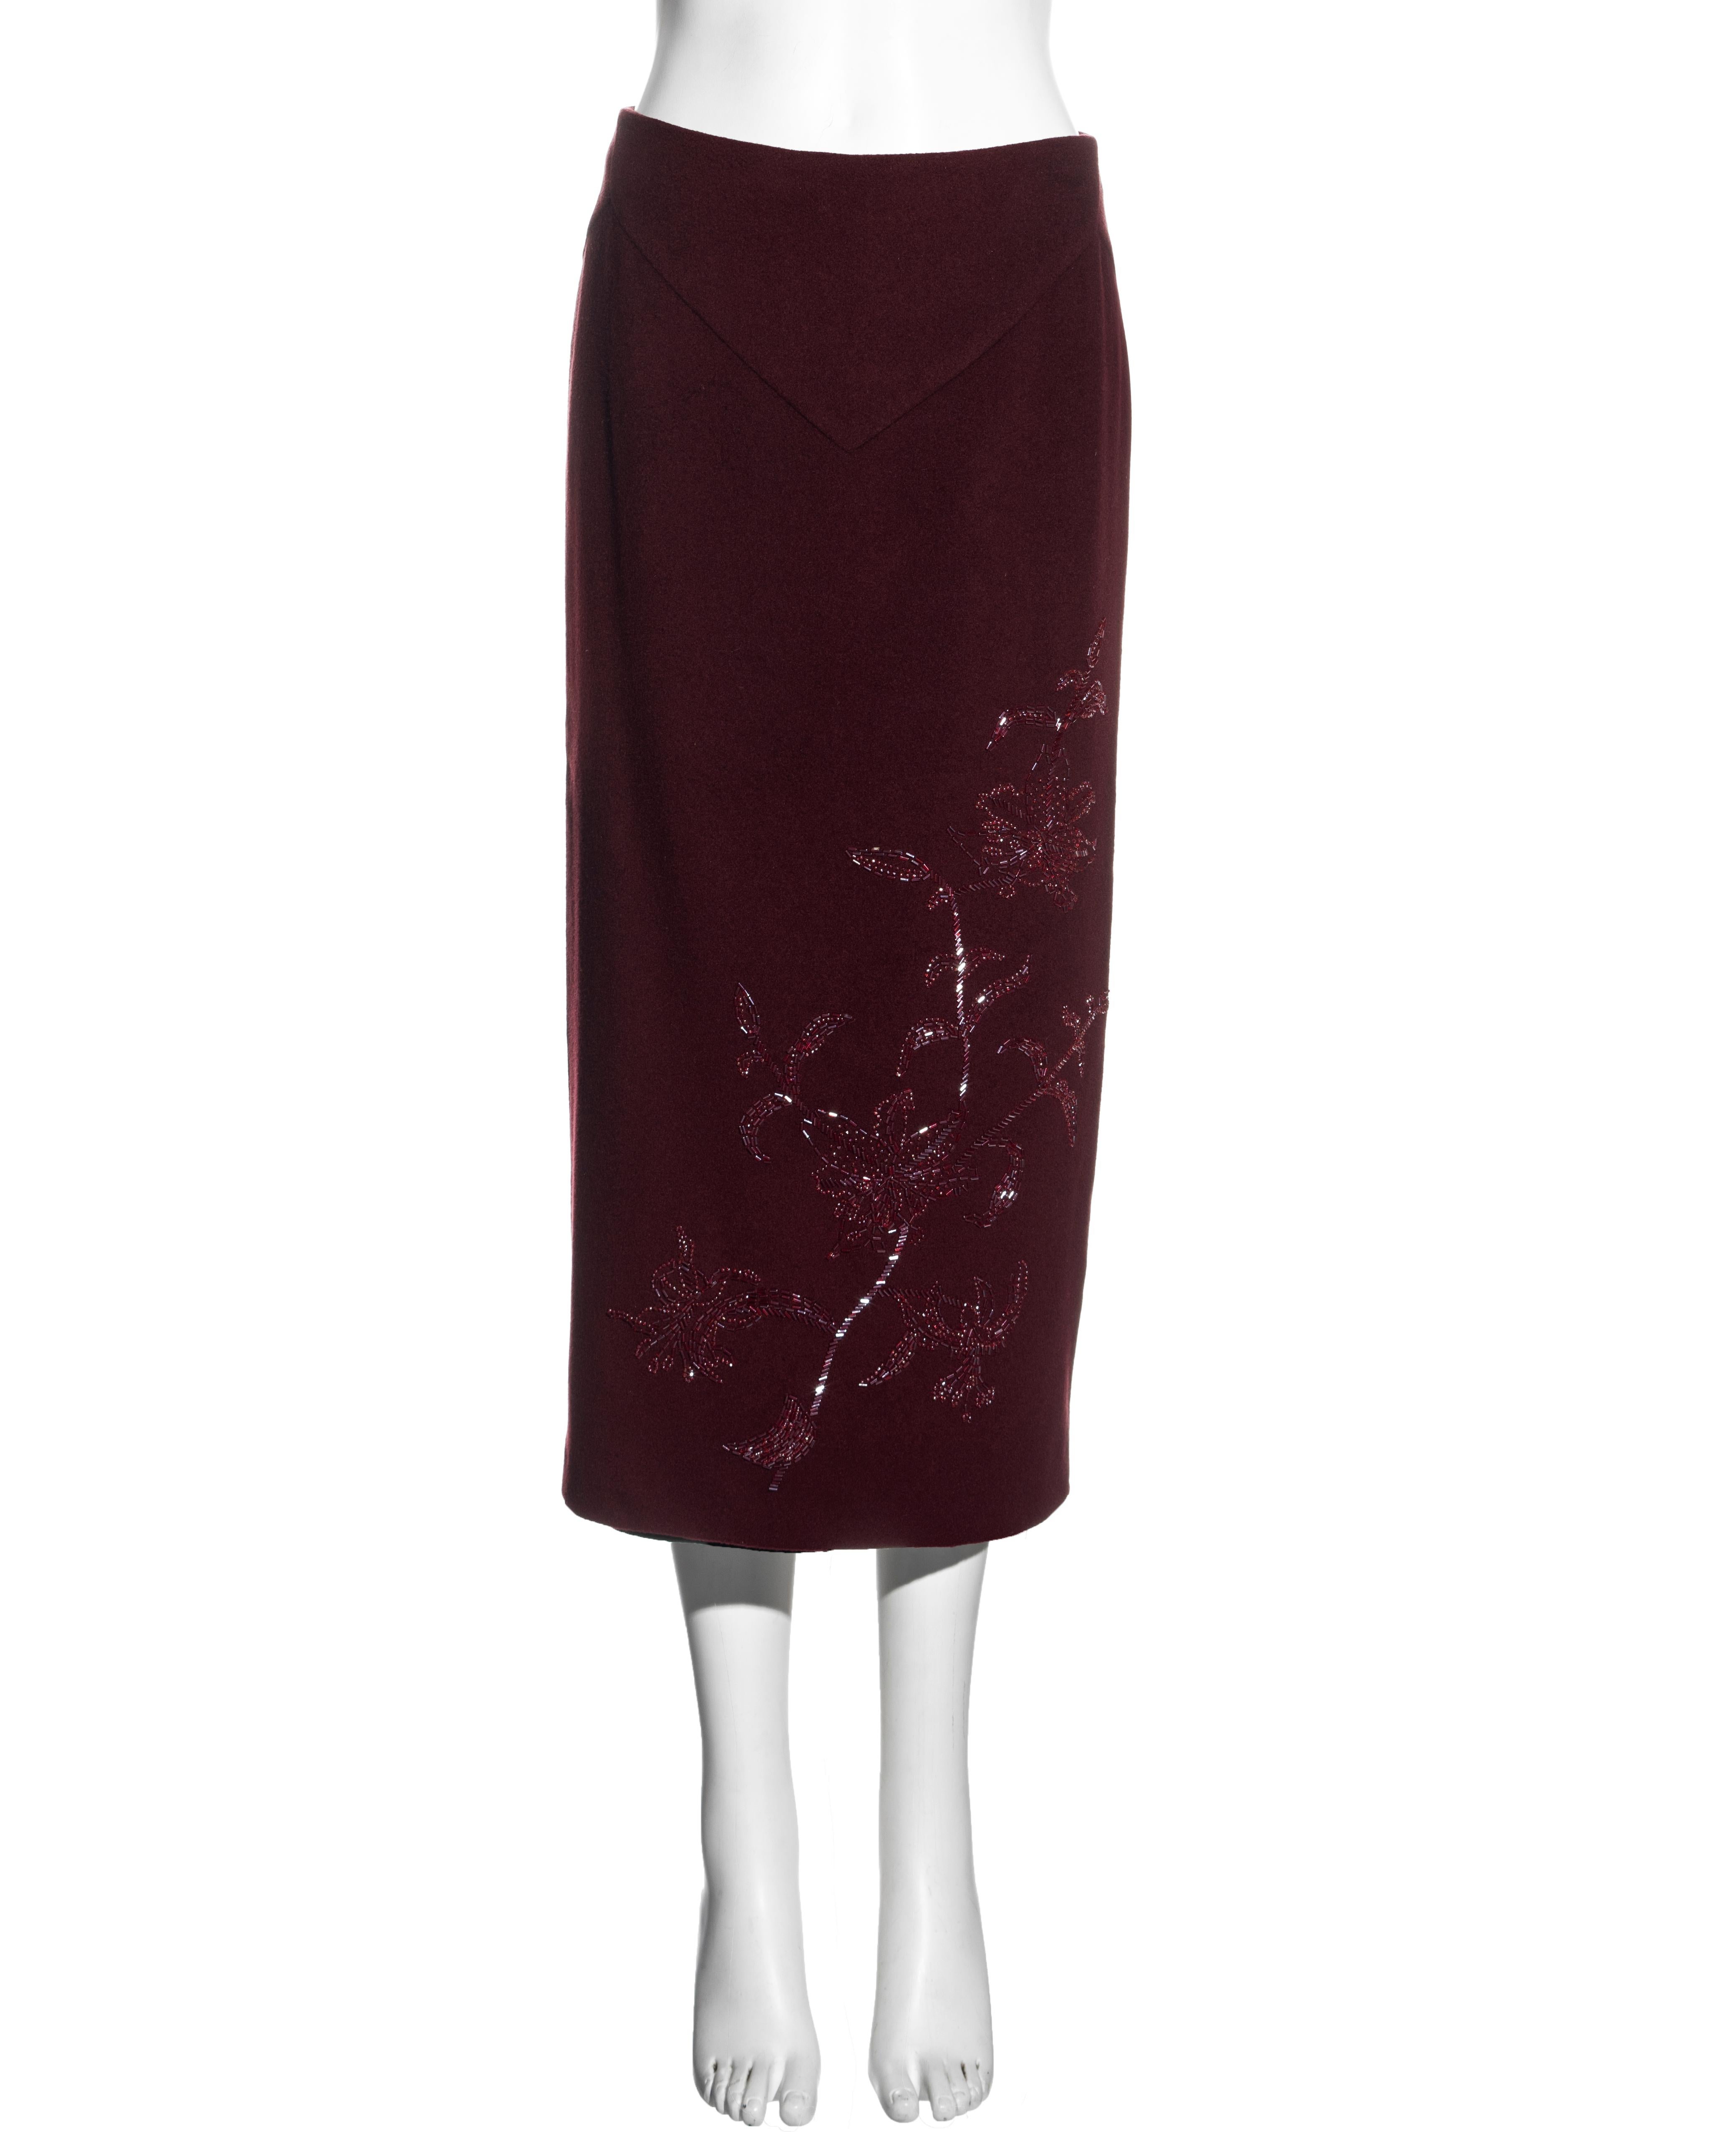 ▪ Alexander McQueen burgundy cashmere wool skirt
▪ Beaded with flowers of blood-red bugle beads 
▪ Triangular panels to the waist
▪ Concealed zipper at center-back
▪ Monogrammed lining
▪ 100% Cashmere 
▪ IT 42 - FR 38 - UK 10
▪ 'Joan' Fall-Winter